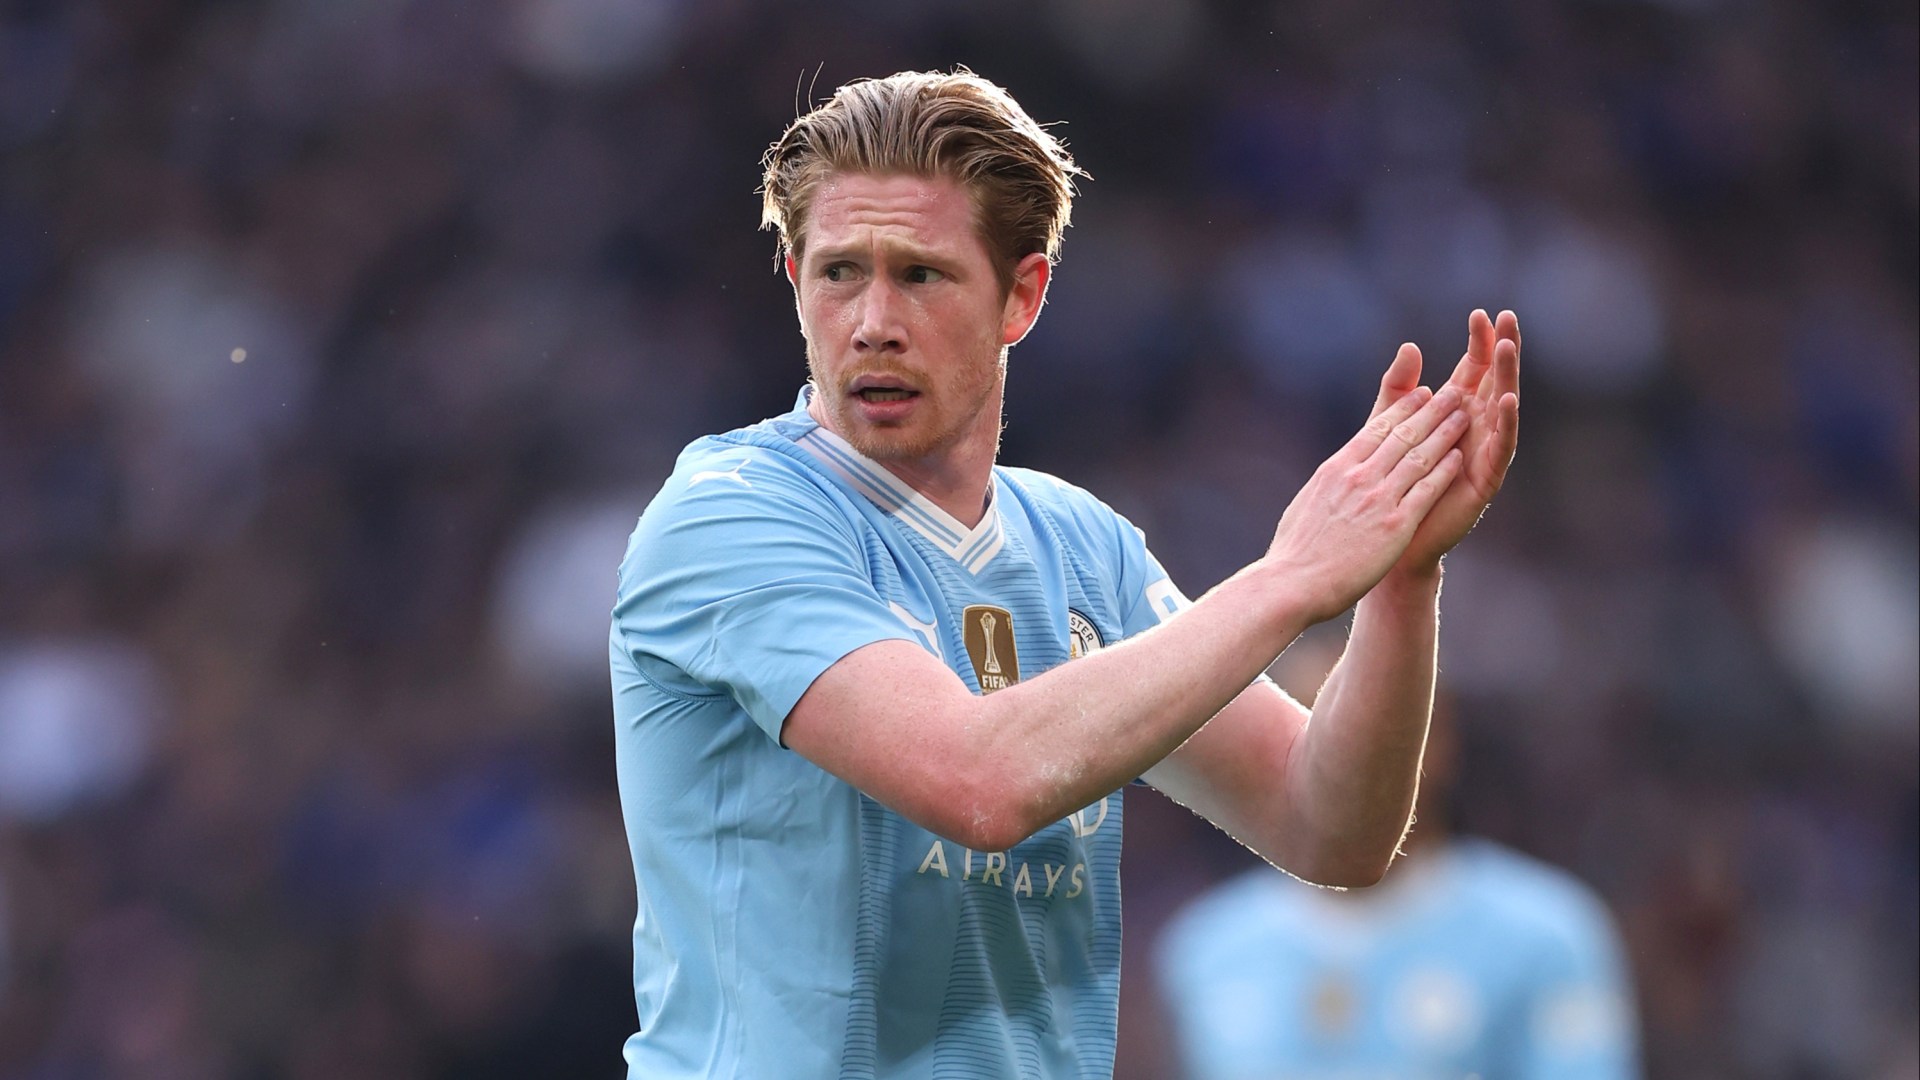 Kevin De Bruyne tipped for stunning MLS transfer by former Belgium team-mate as Man City ace